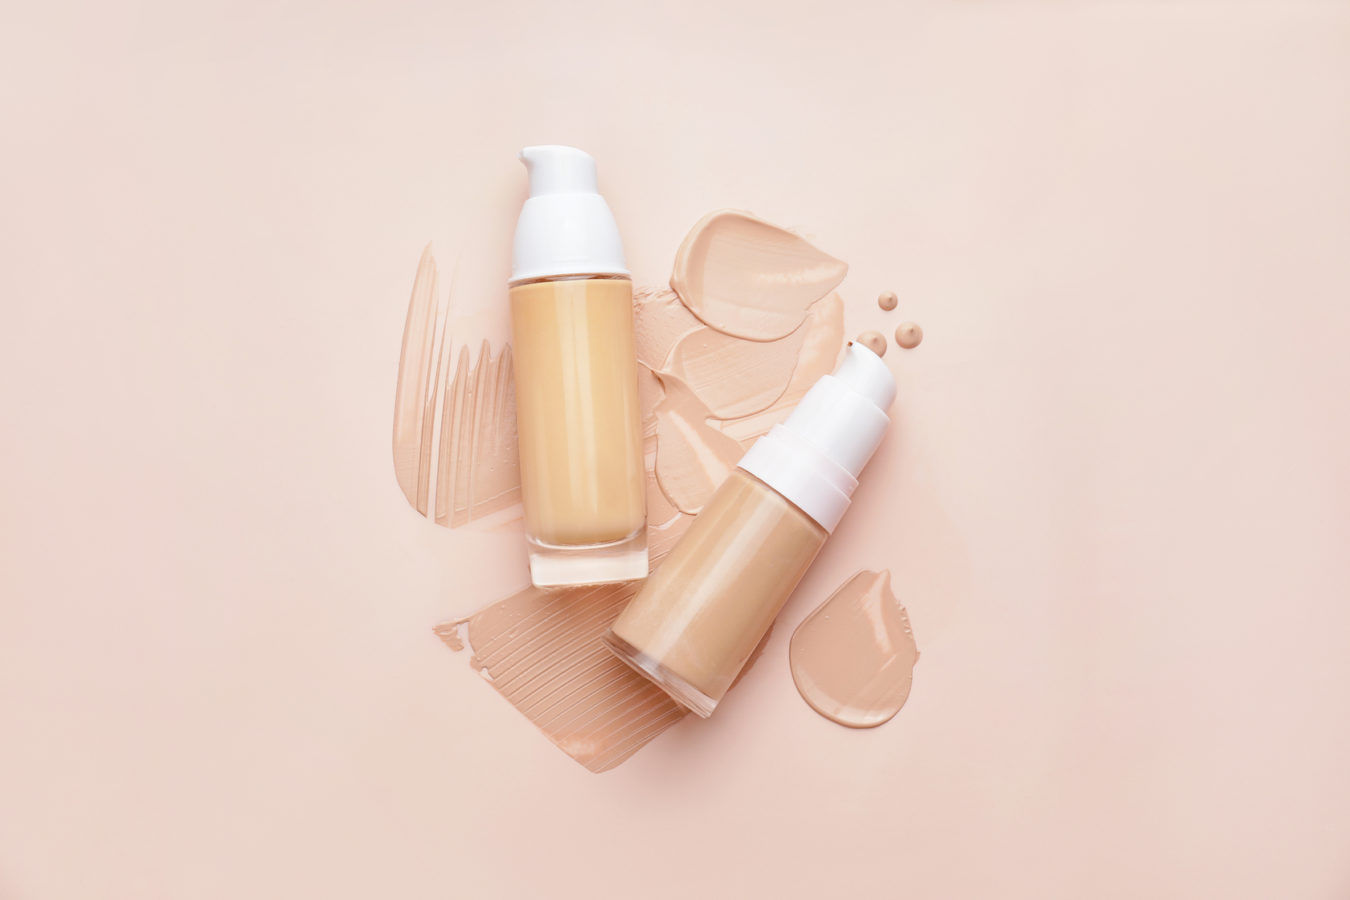 Protect your skin while perfecting your base with these SPF foundations